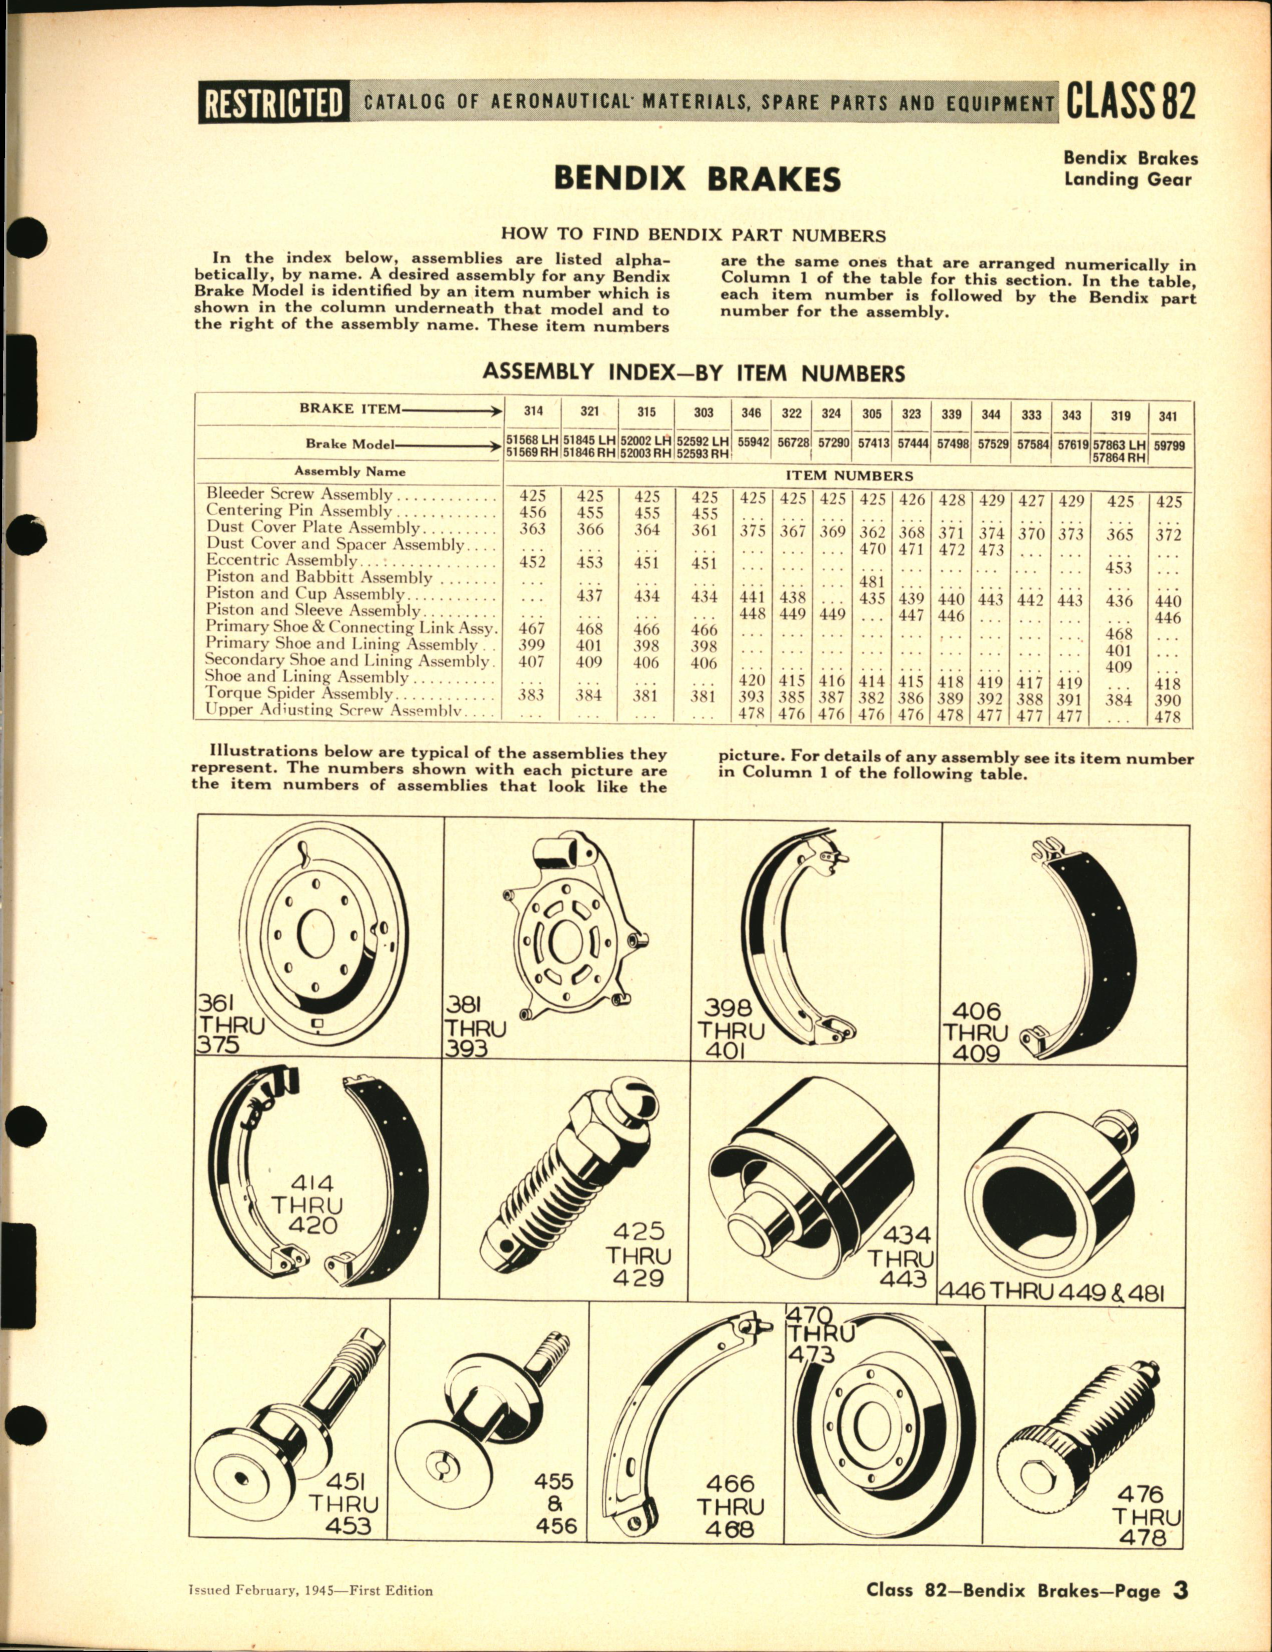 Sample page 3 from AirCorps Library document: Bendix Brakes, Duo Servo and Single Servo